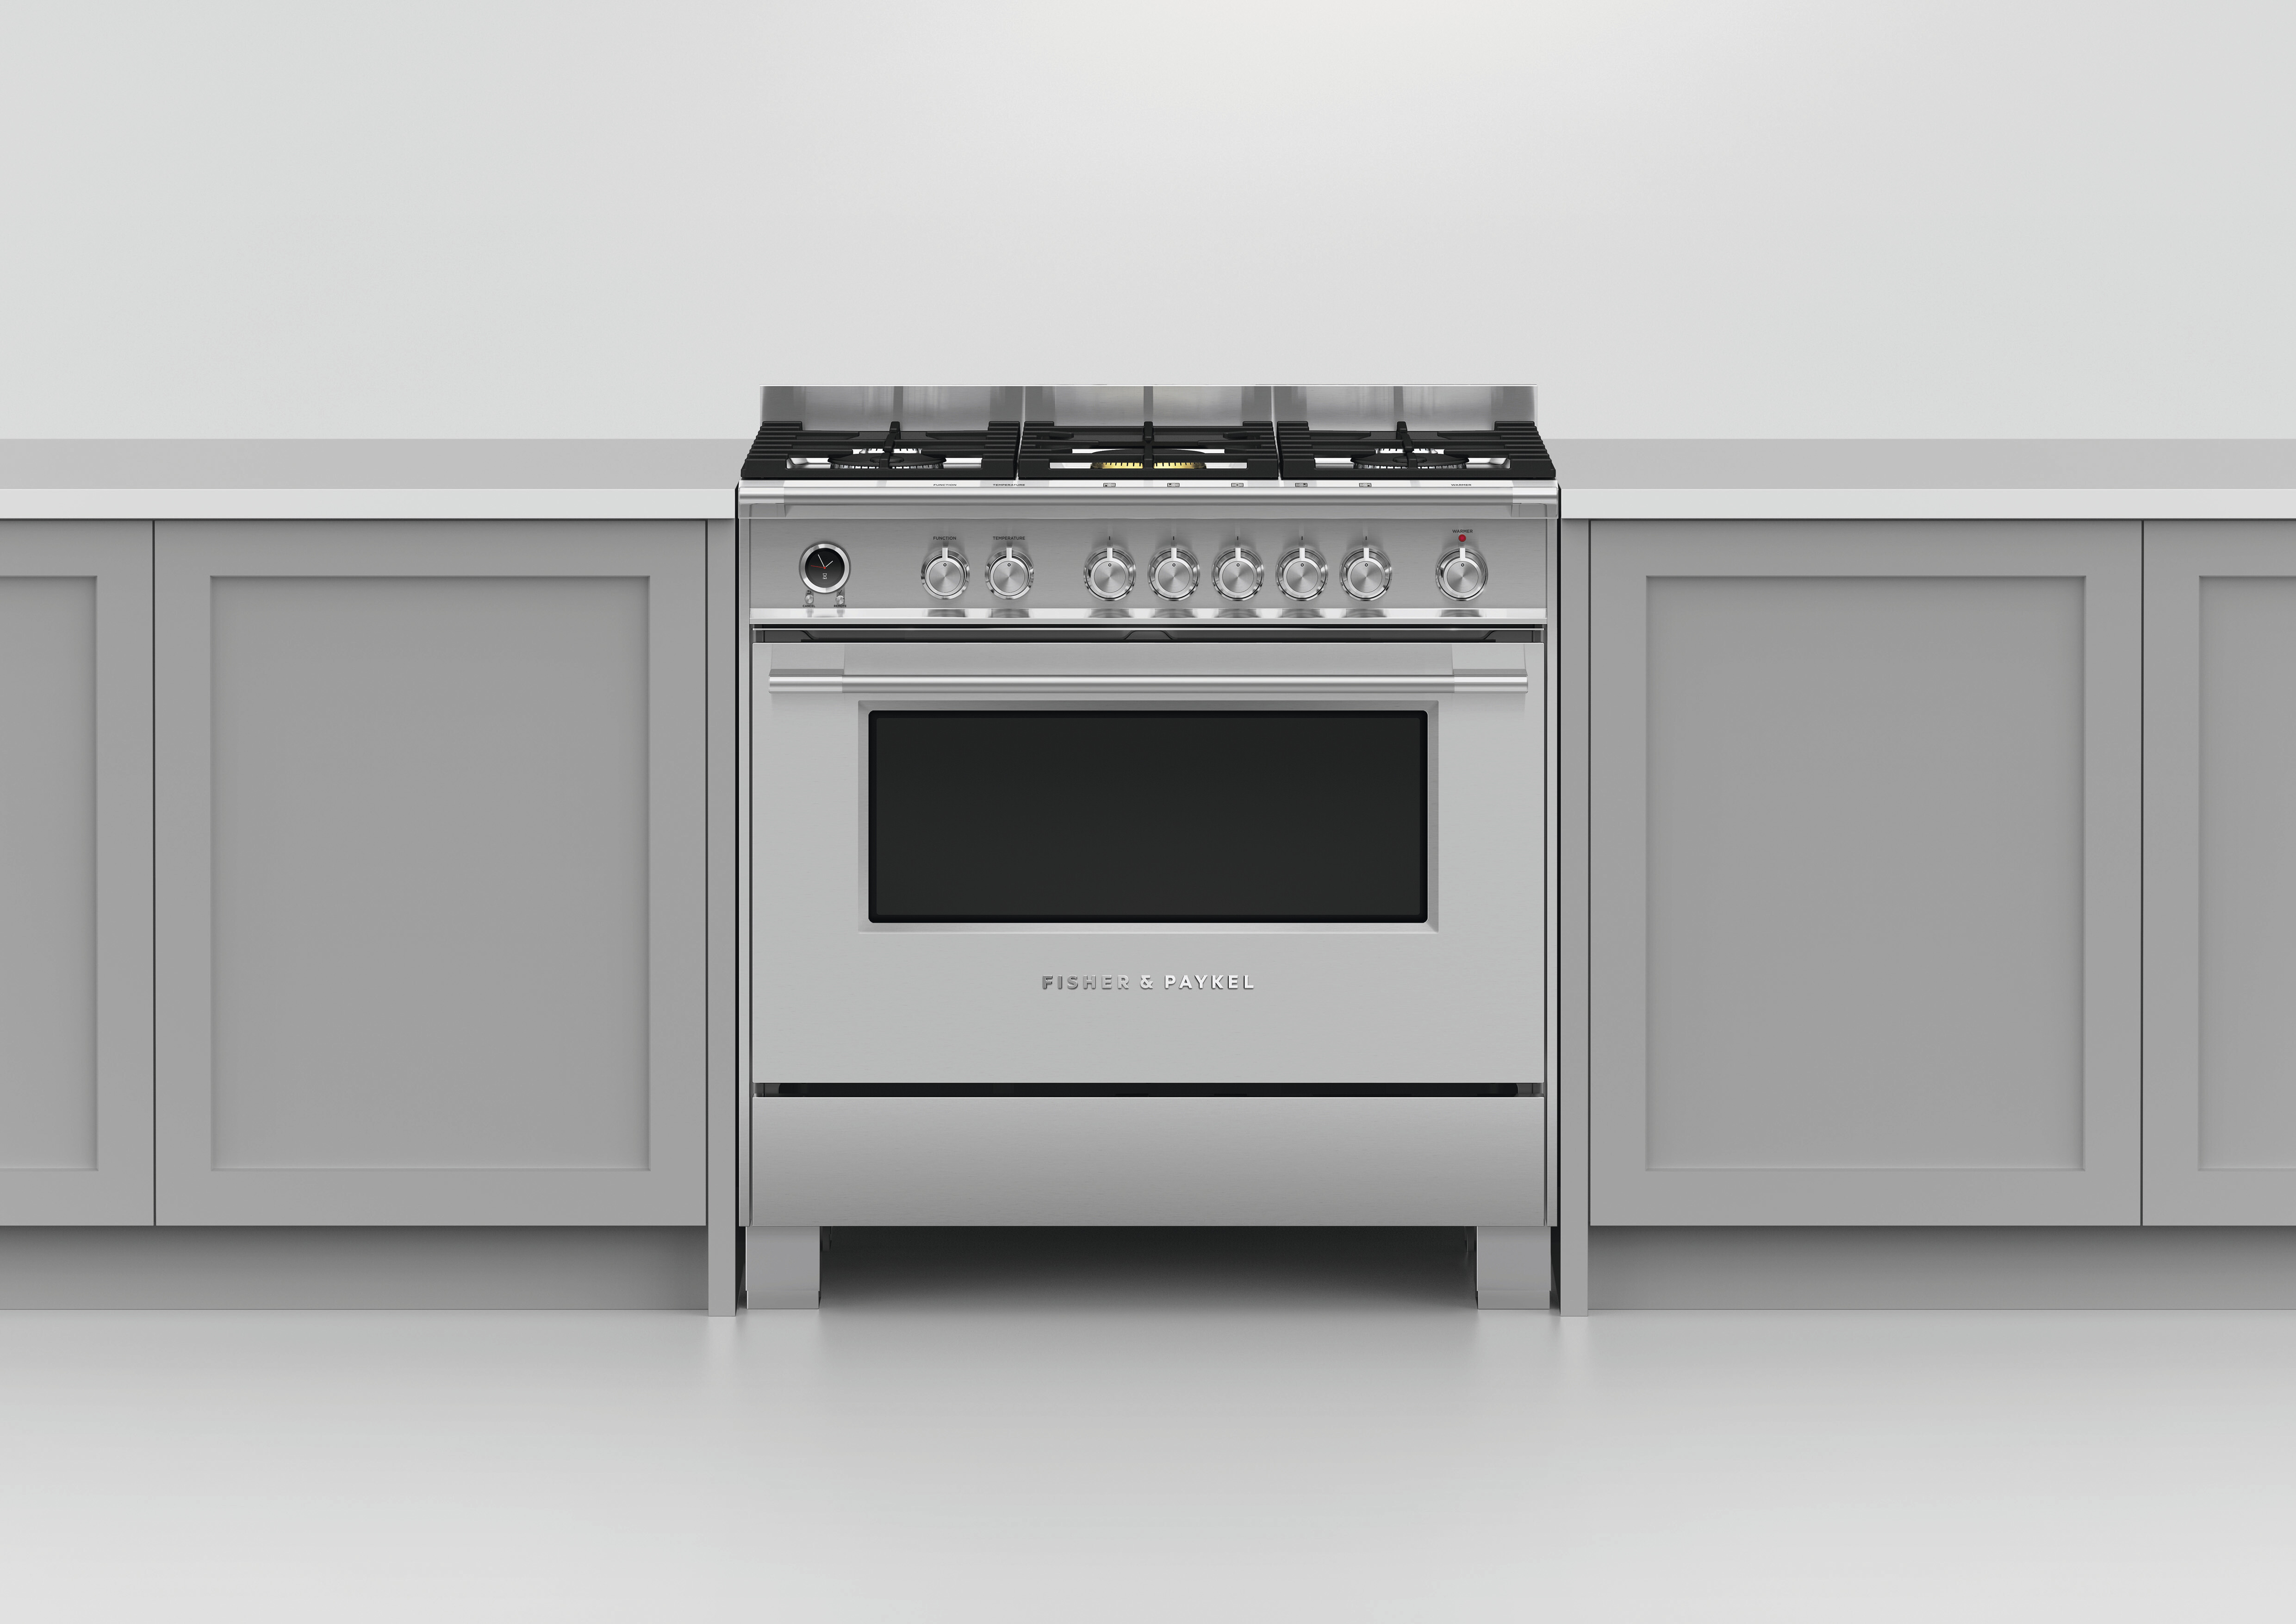 Save Up To $1,000 On Selected Fisher & Paykel Cooking Appliances* at Hart & Co